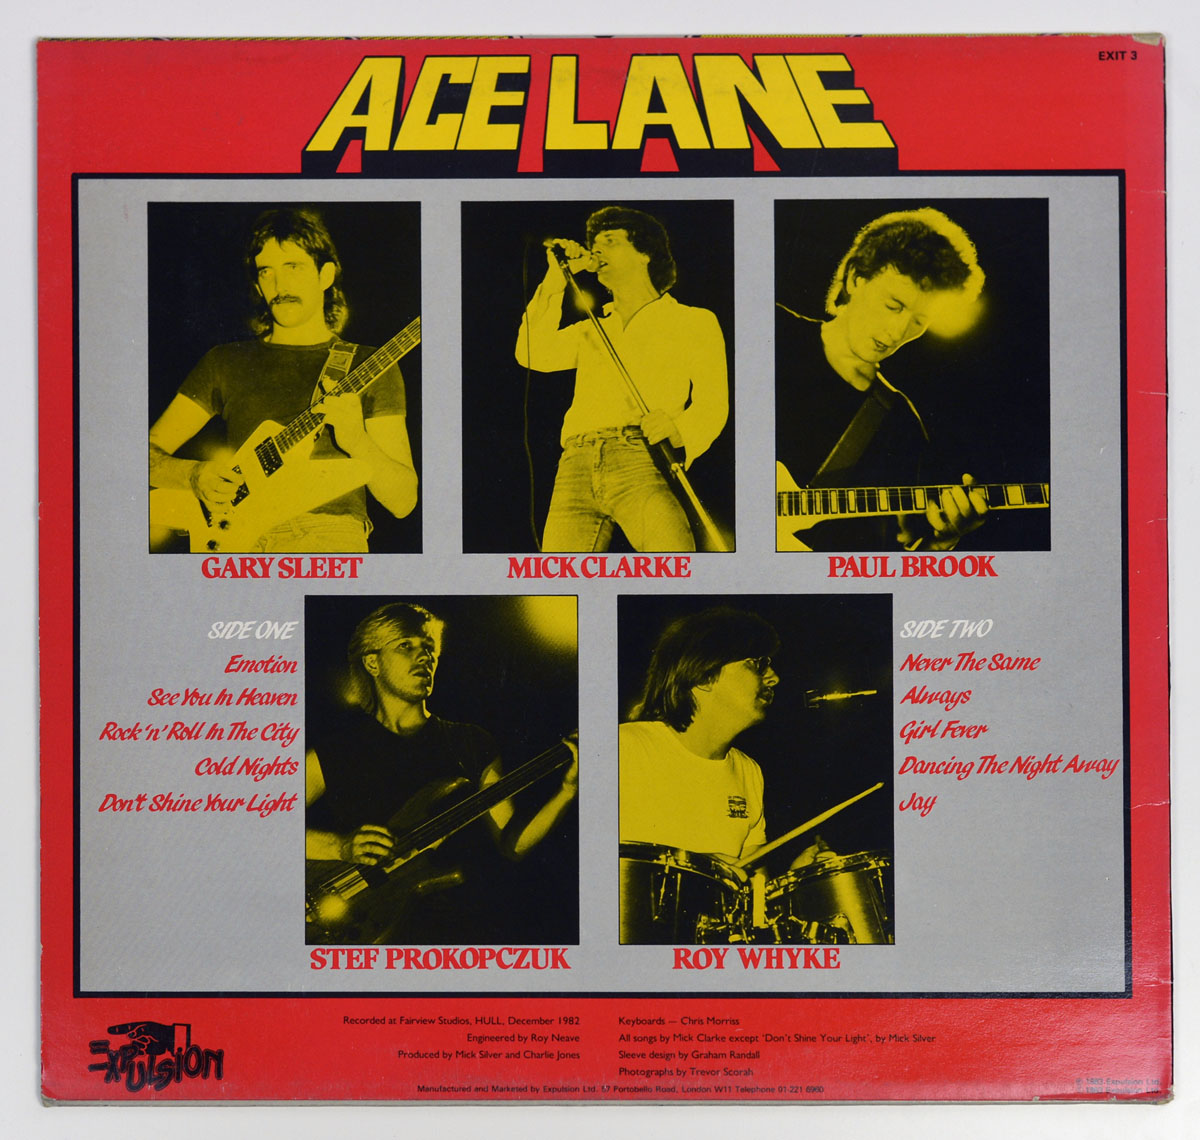 High Resolution Photos of ACE LANE - See You in Heaven NWOBHM 